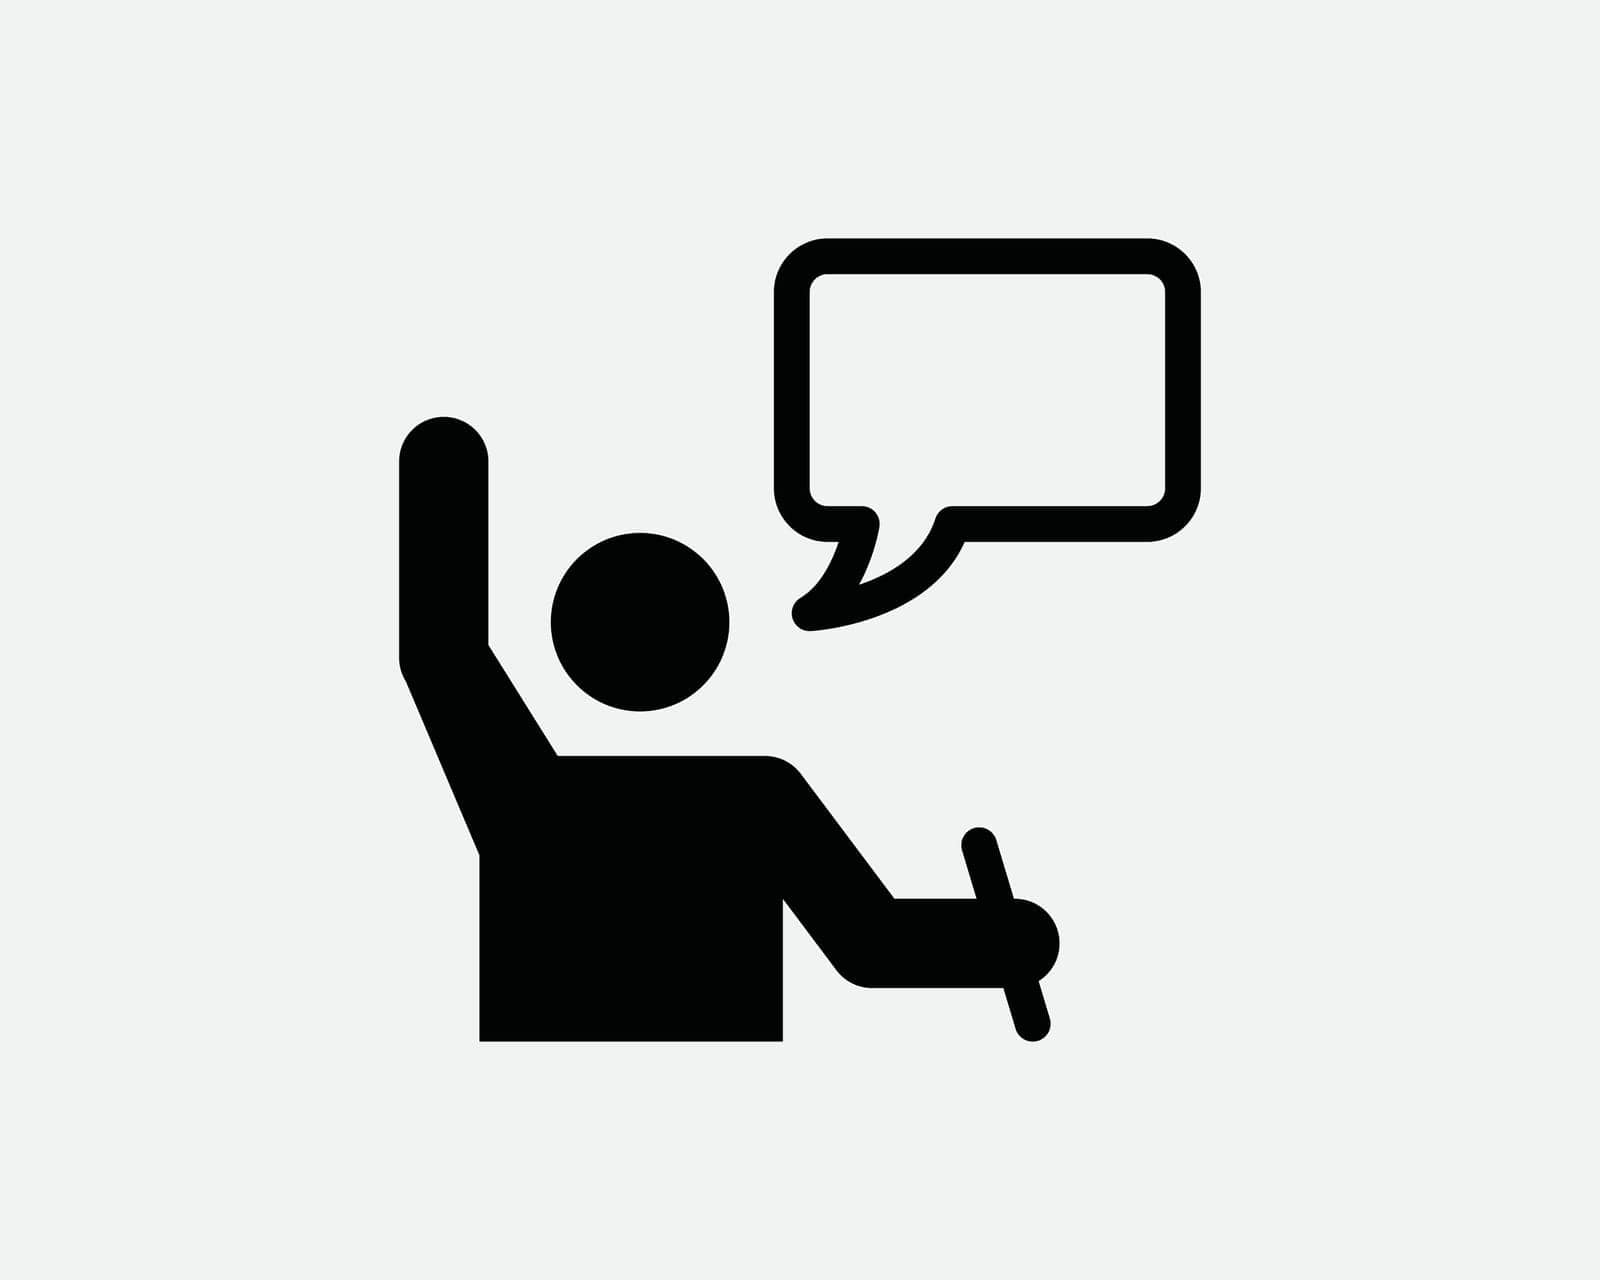 Student Raise Hand Asking Question Give Opinion Speech Bubble Black and White Icon Sign Symbol Vector Artwork Clipart Illustration